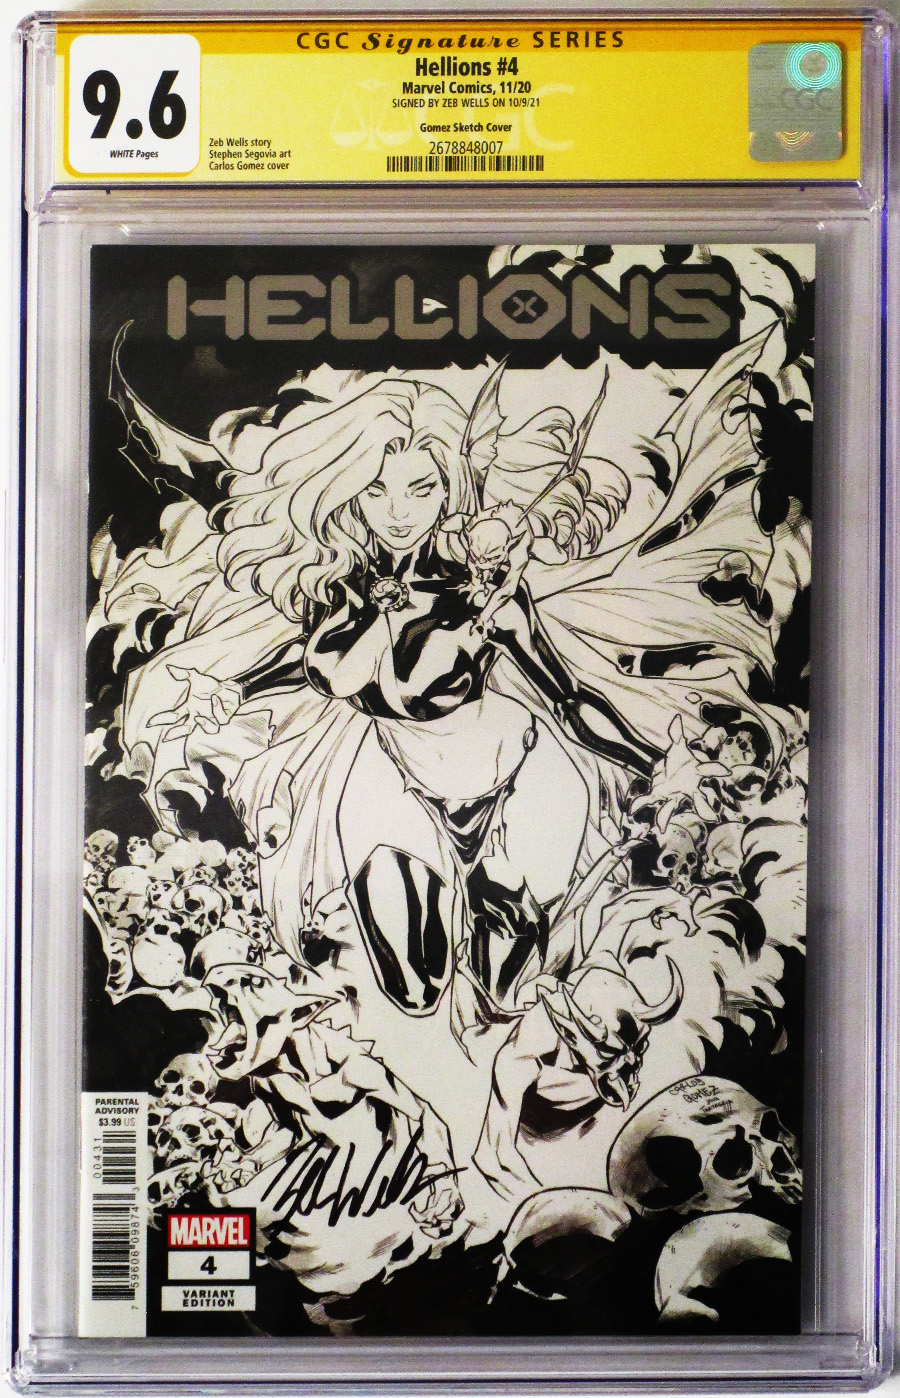 Hellions #4 Cover D Carlos E Gomez Sketch Cover Signed By Zeb Wells CGC 9.6